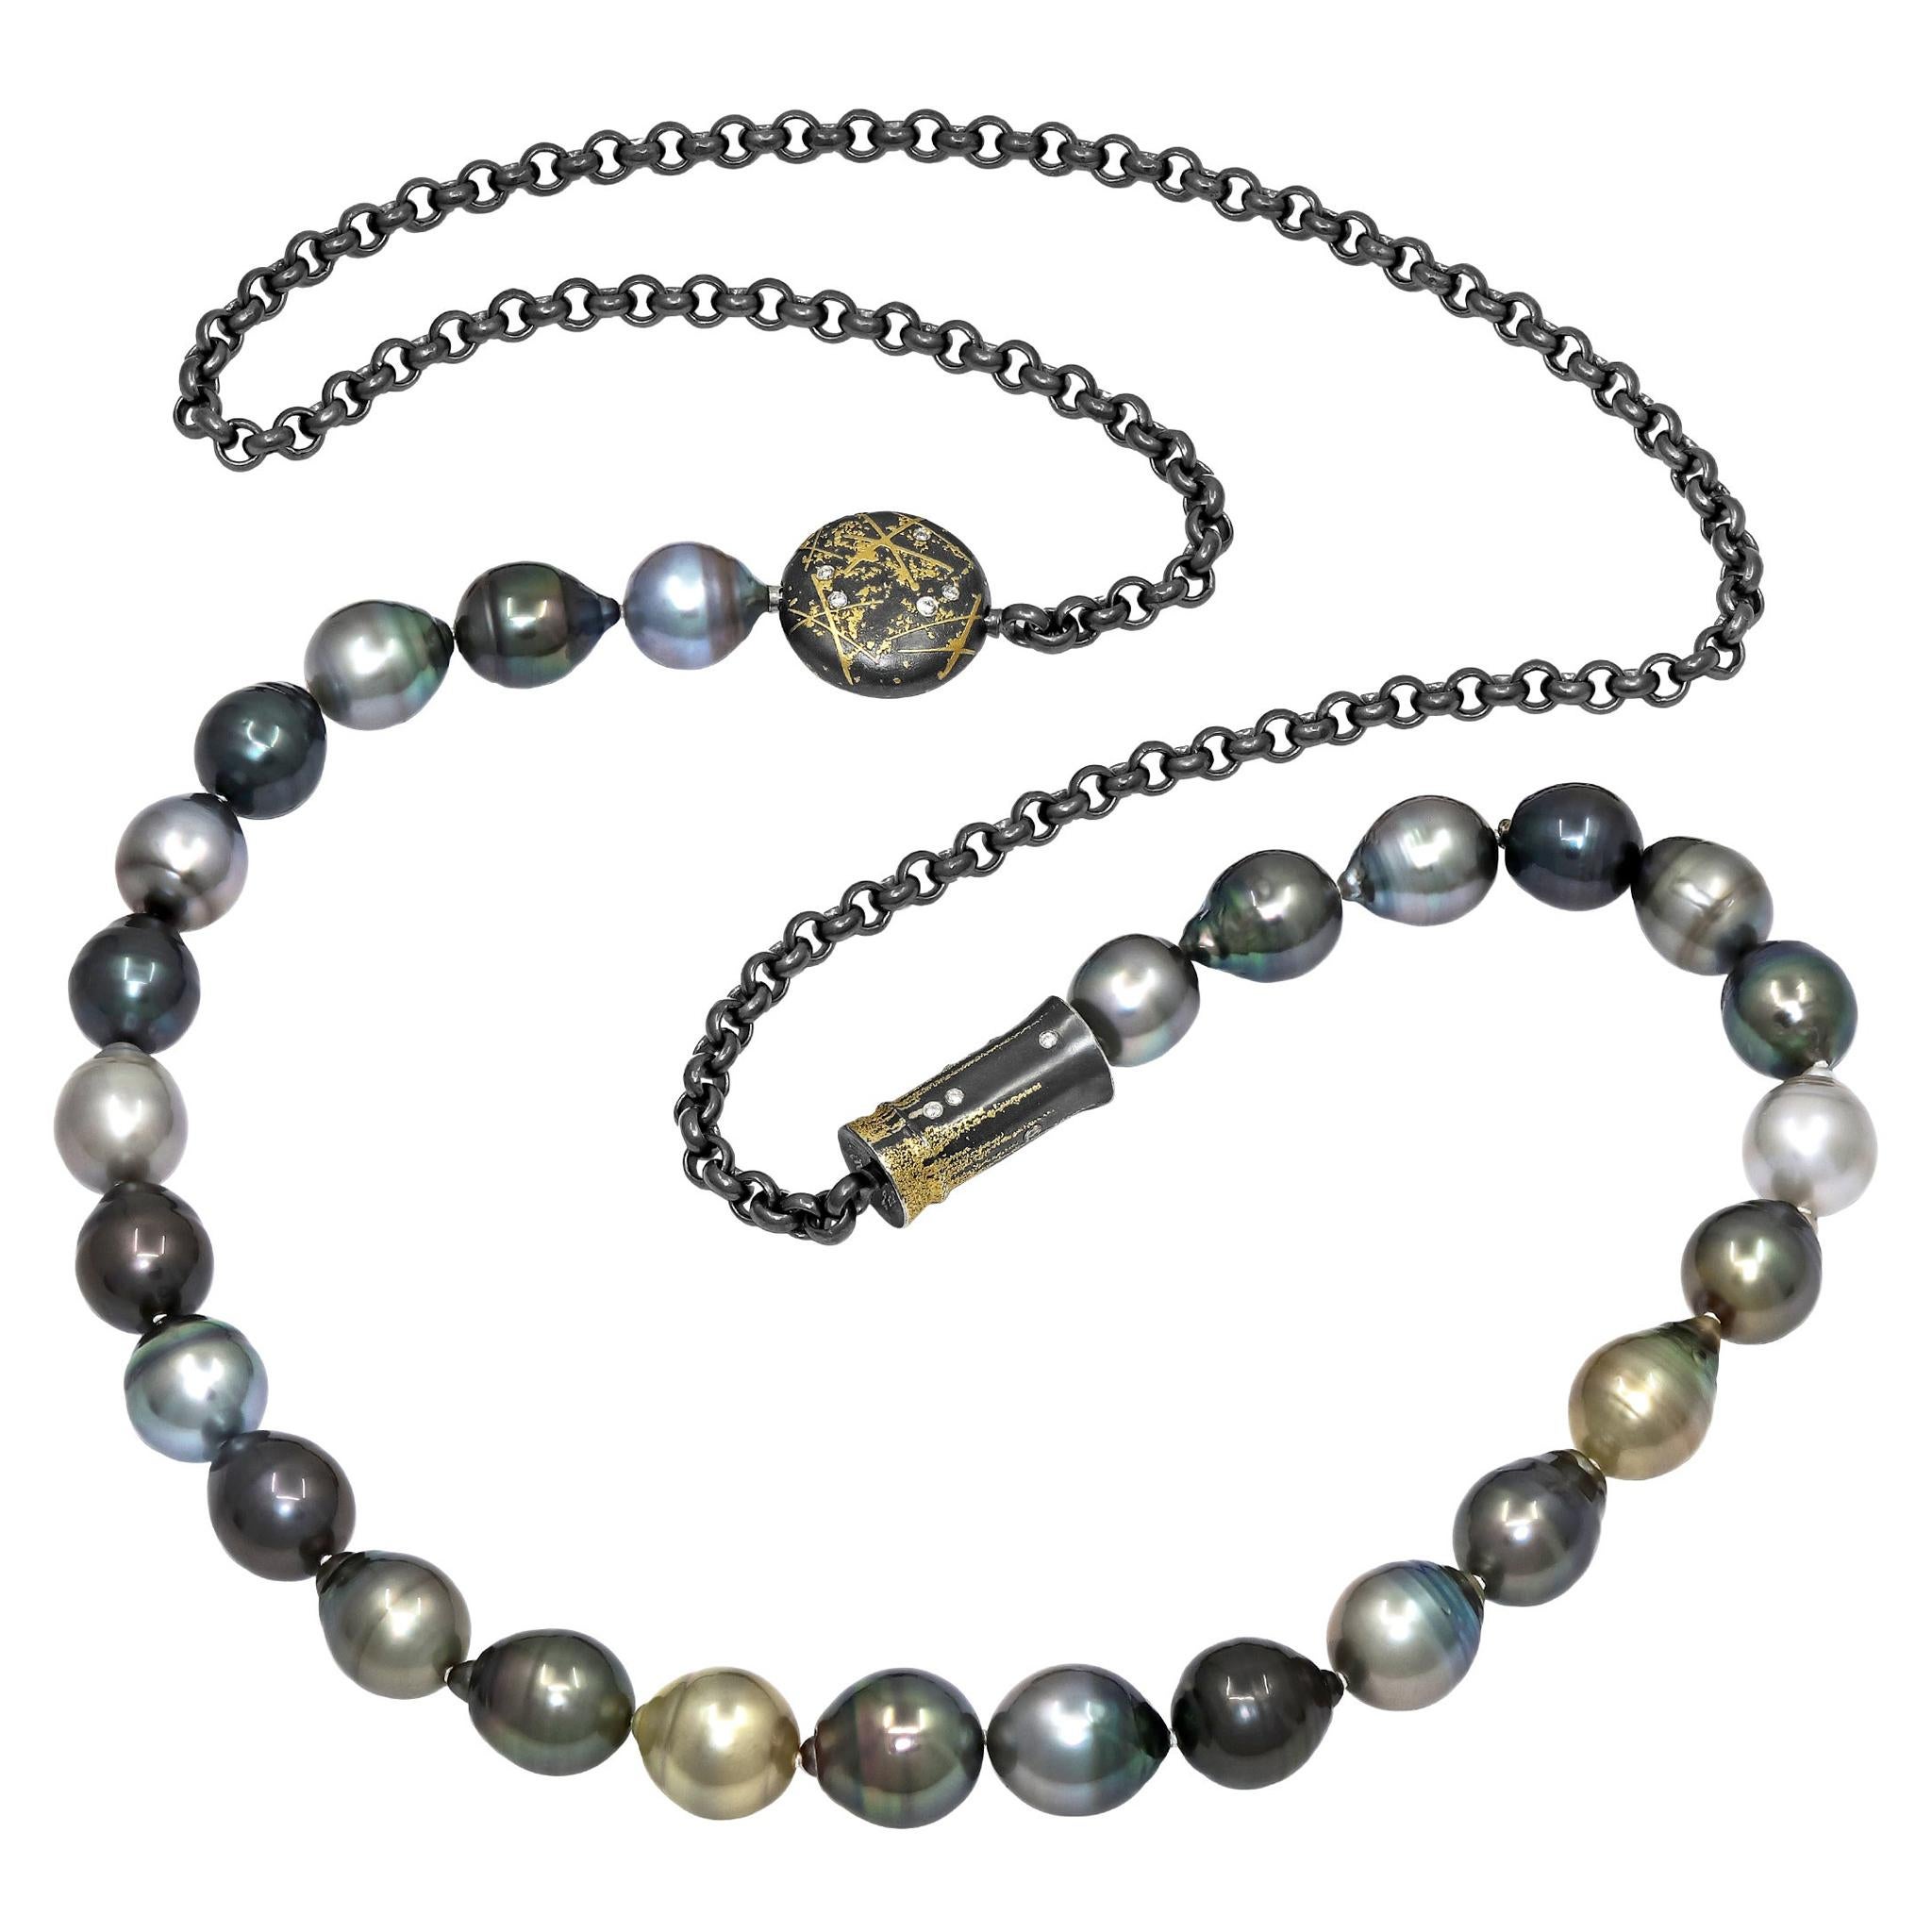 Atelier Zobel Baroque Tahitian Pearl Multi-Convertible Clasp Long Chain Necklace